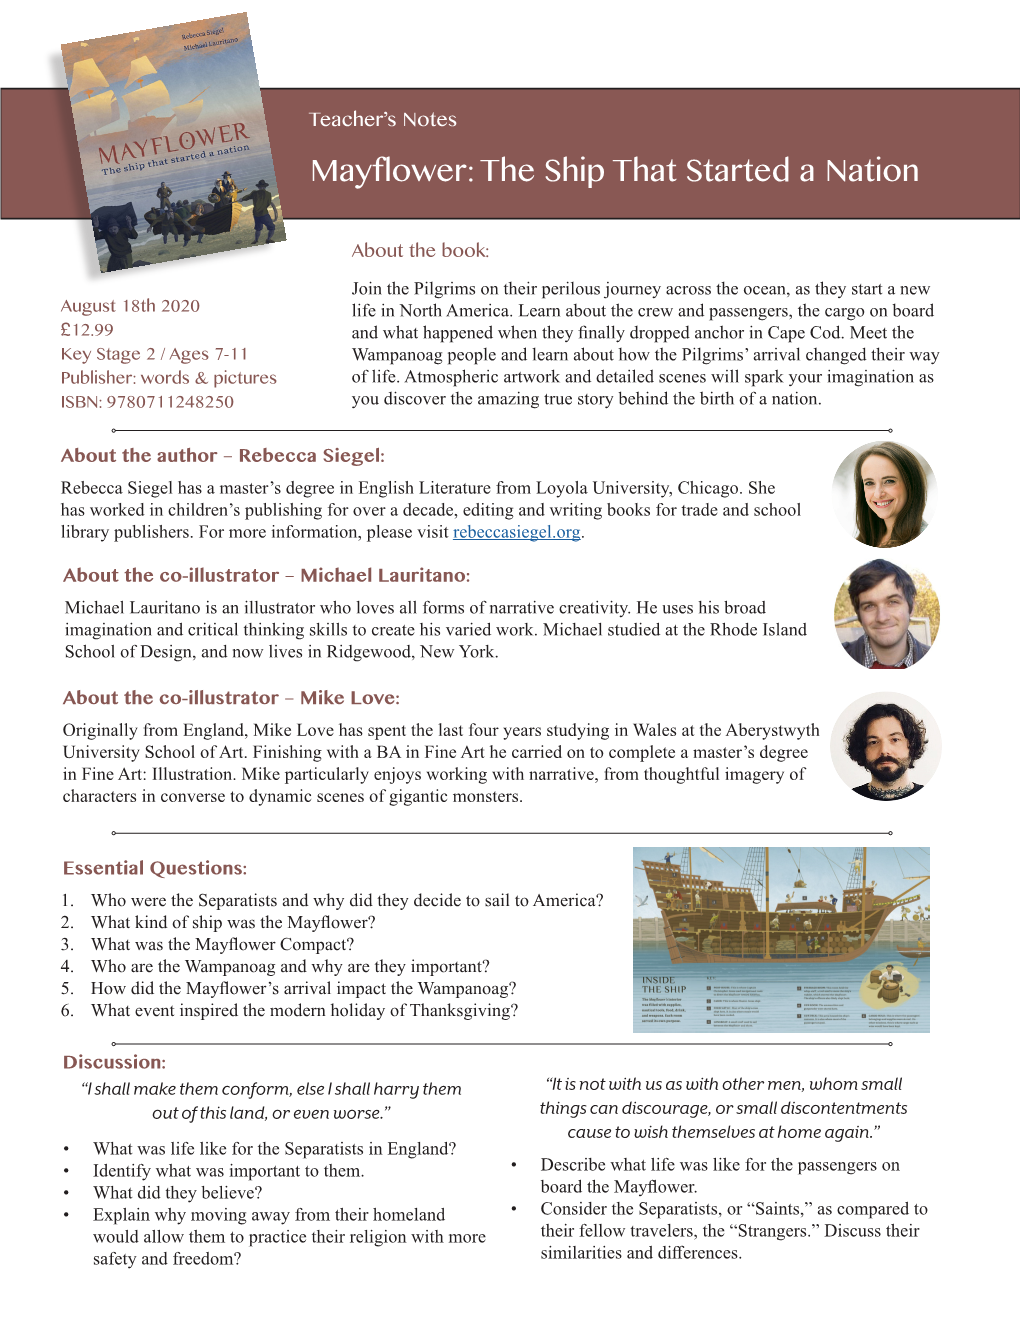 Mayflower: the Ship That Started a Nation